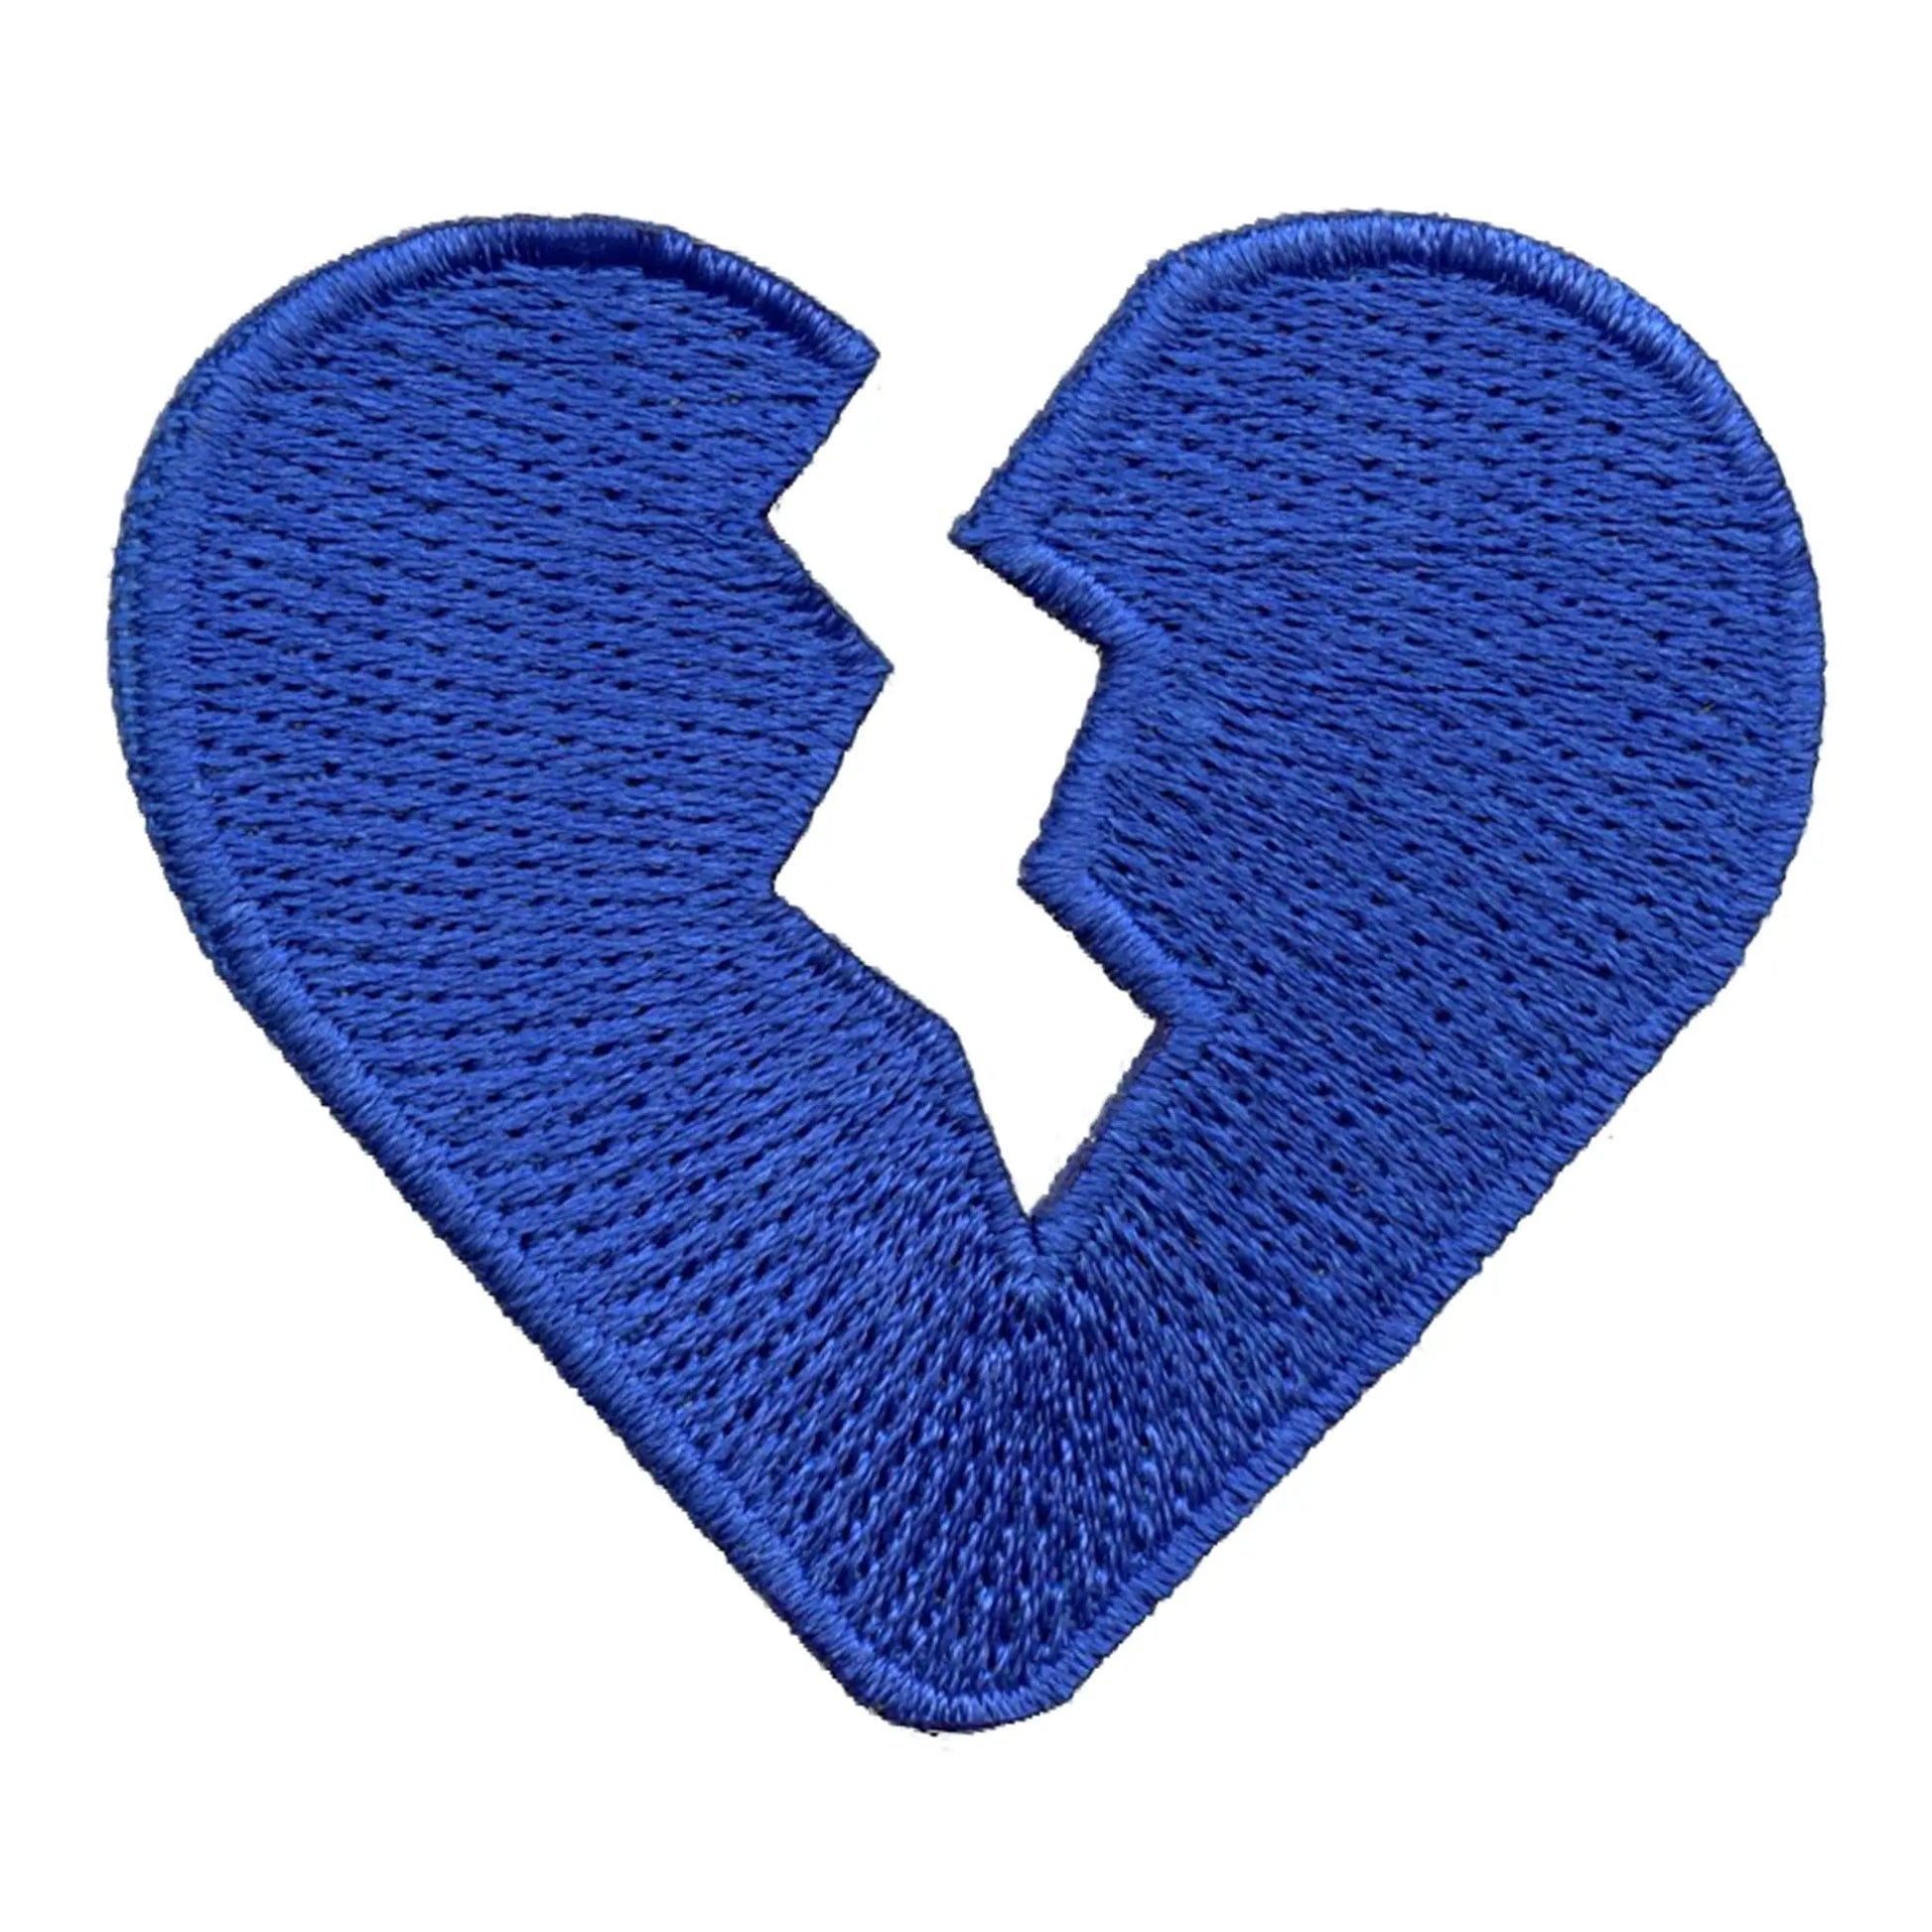 40 Pcs Cute Fabric Mini Heart Patches, Iron-On Love Heart Embroidered  Patch, Sew On Patch DIY Clothing Craft Decoration Accessories, Repair